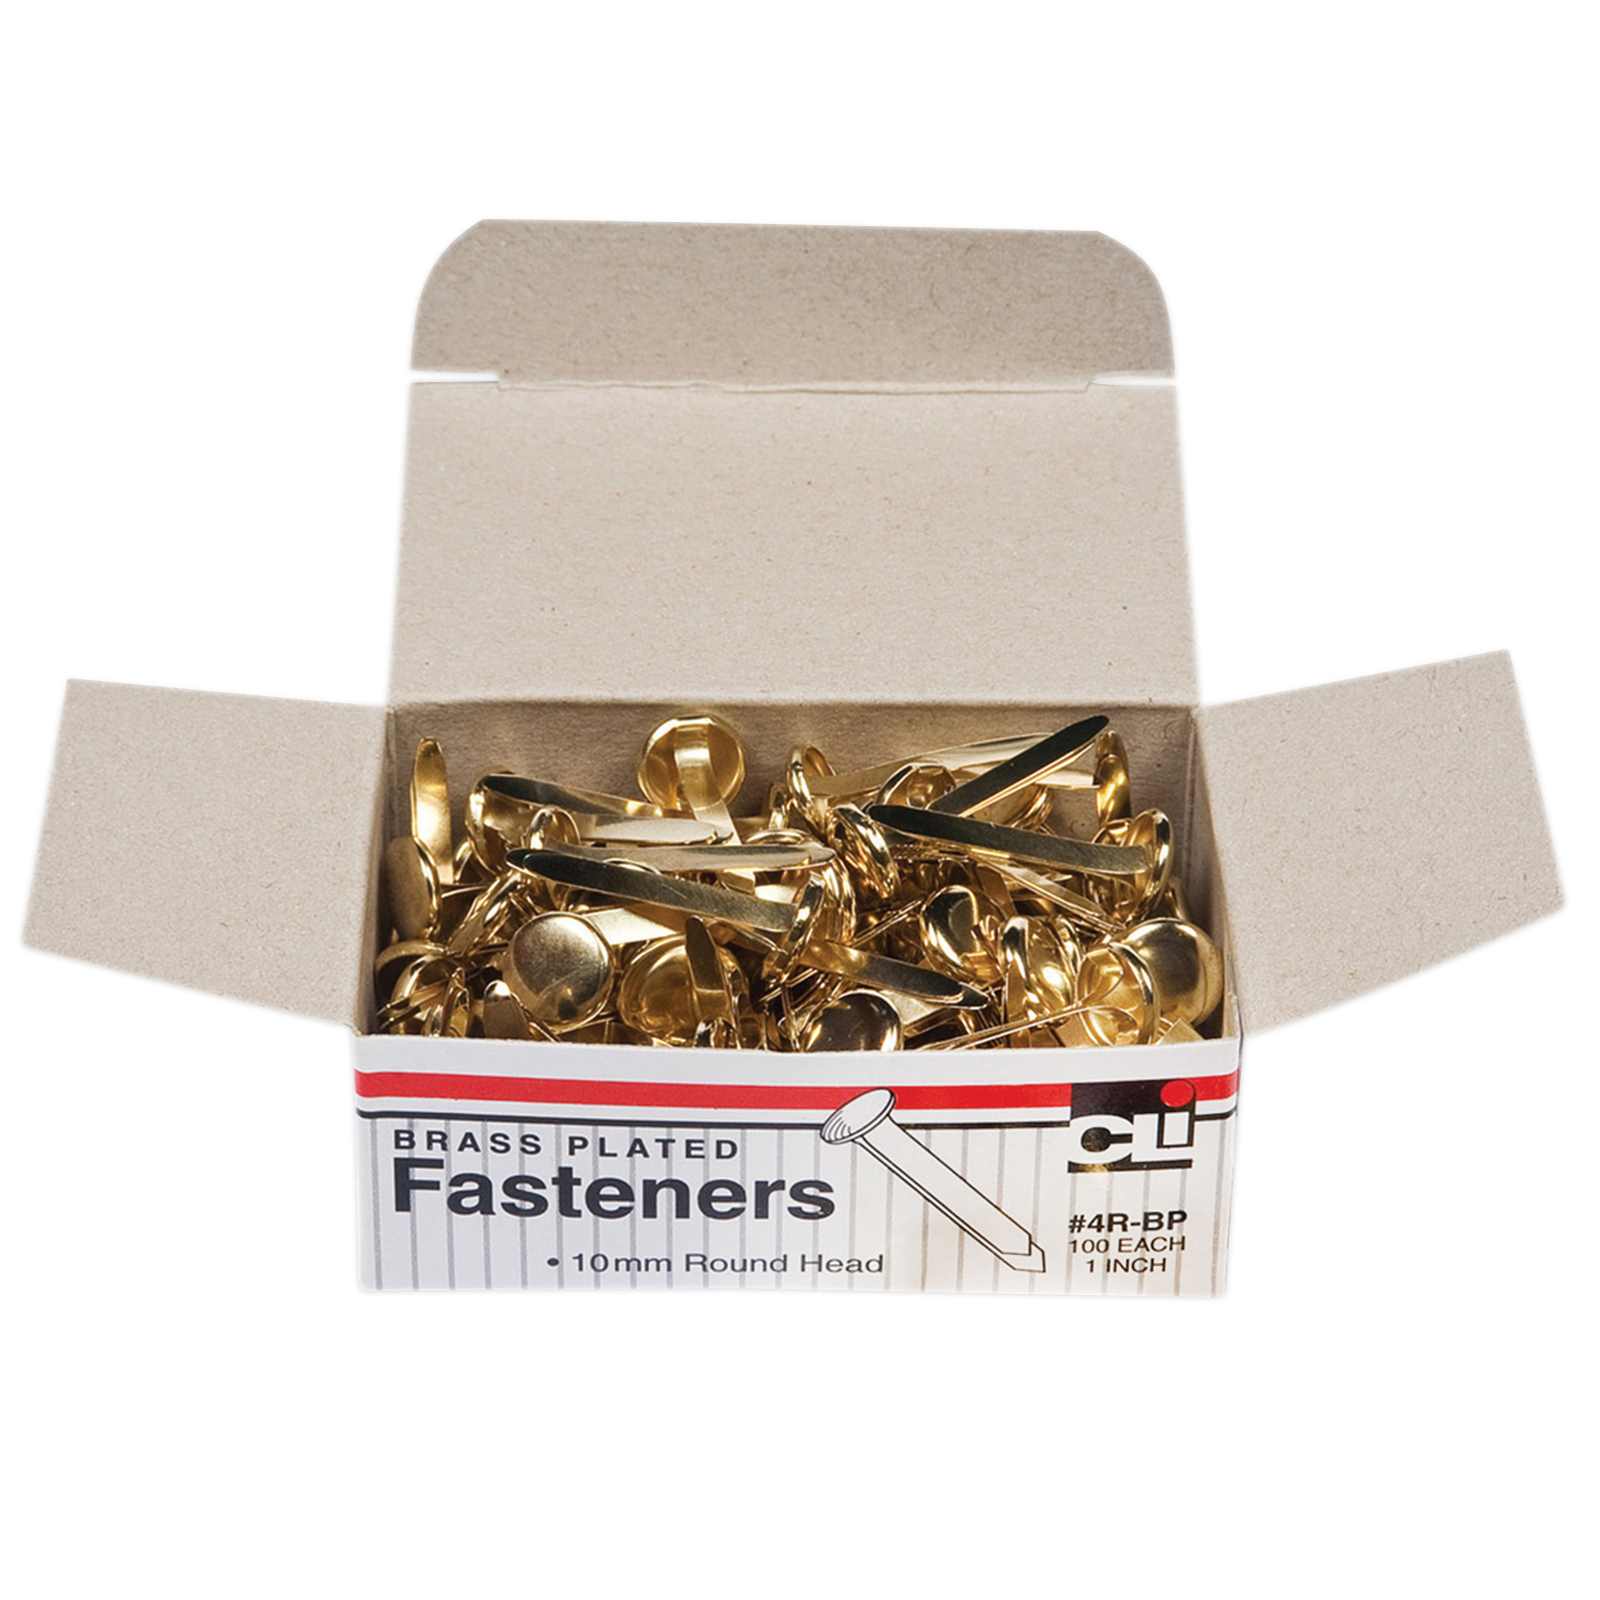 Fasteners, Round Head, Brass Plated, 1 Inch Shank, 10 mm Head, Box of 100